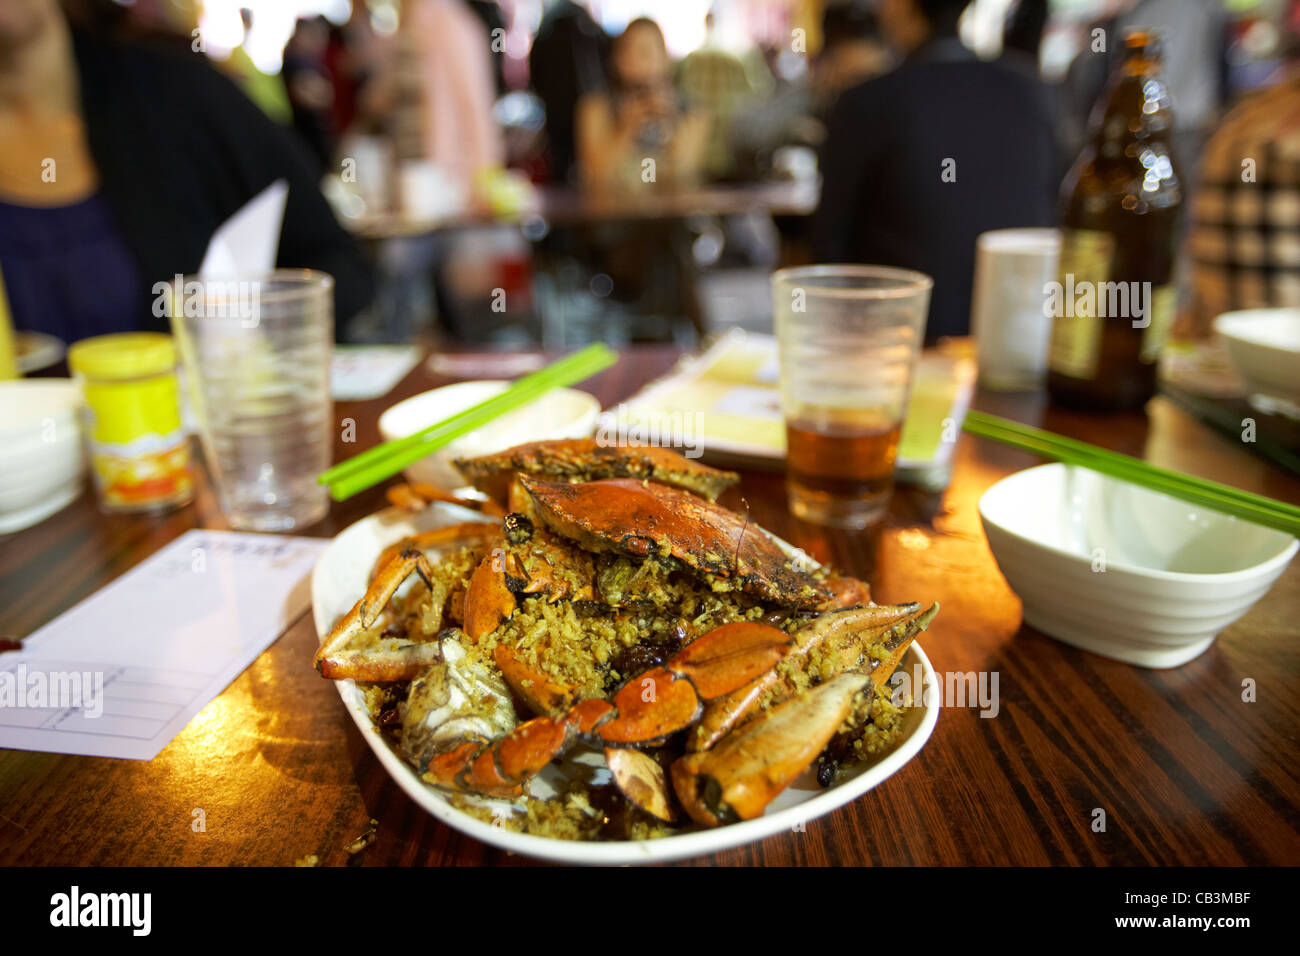 plate of spicy crab seafood at a table in an outdoor market temple street cafe at night kowloon hong kong hksar china Stock Photo